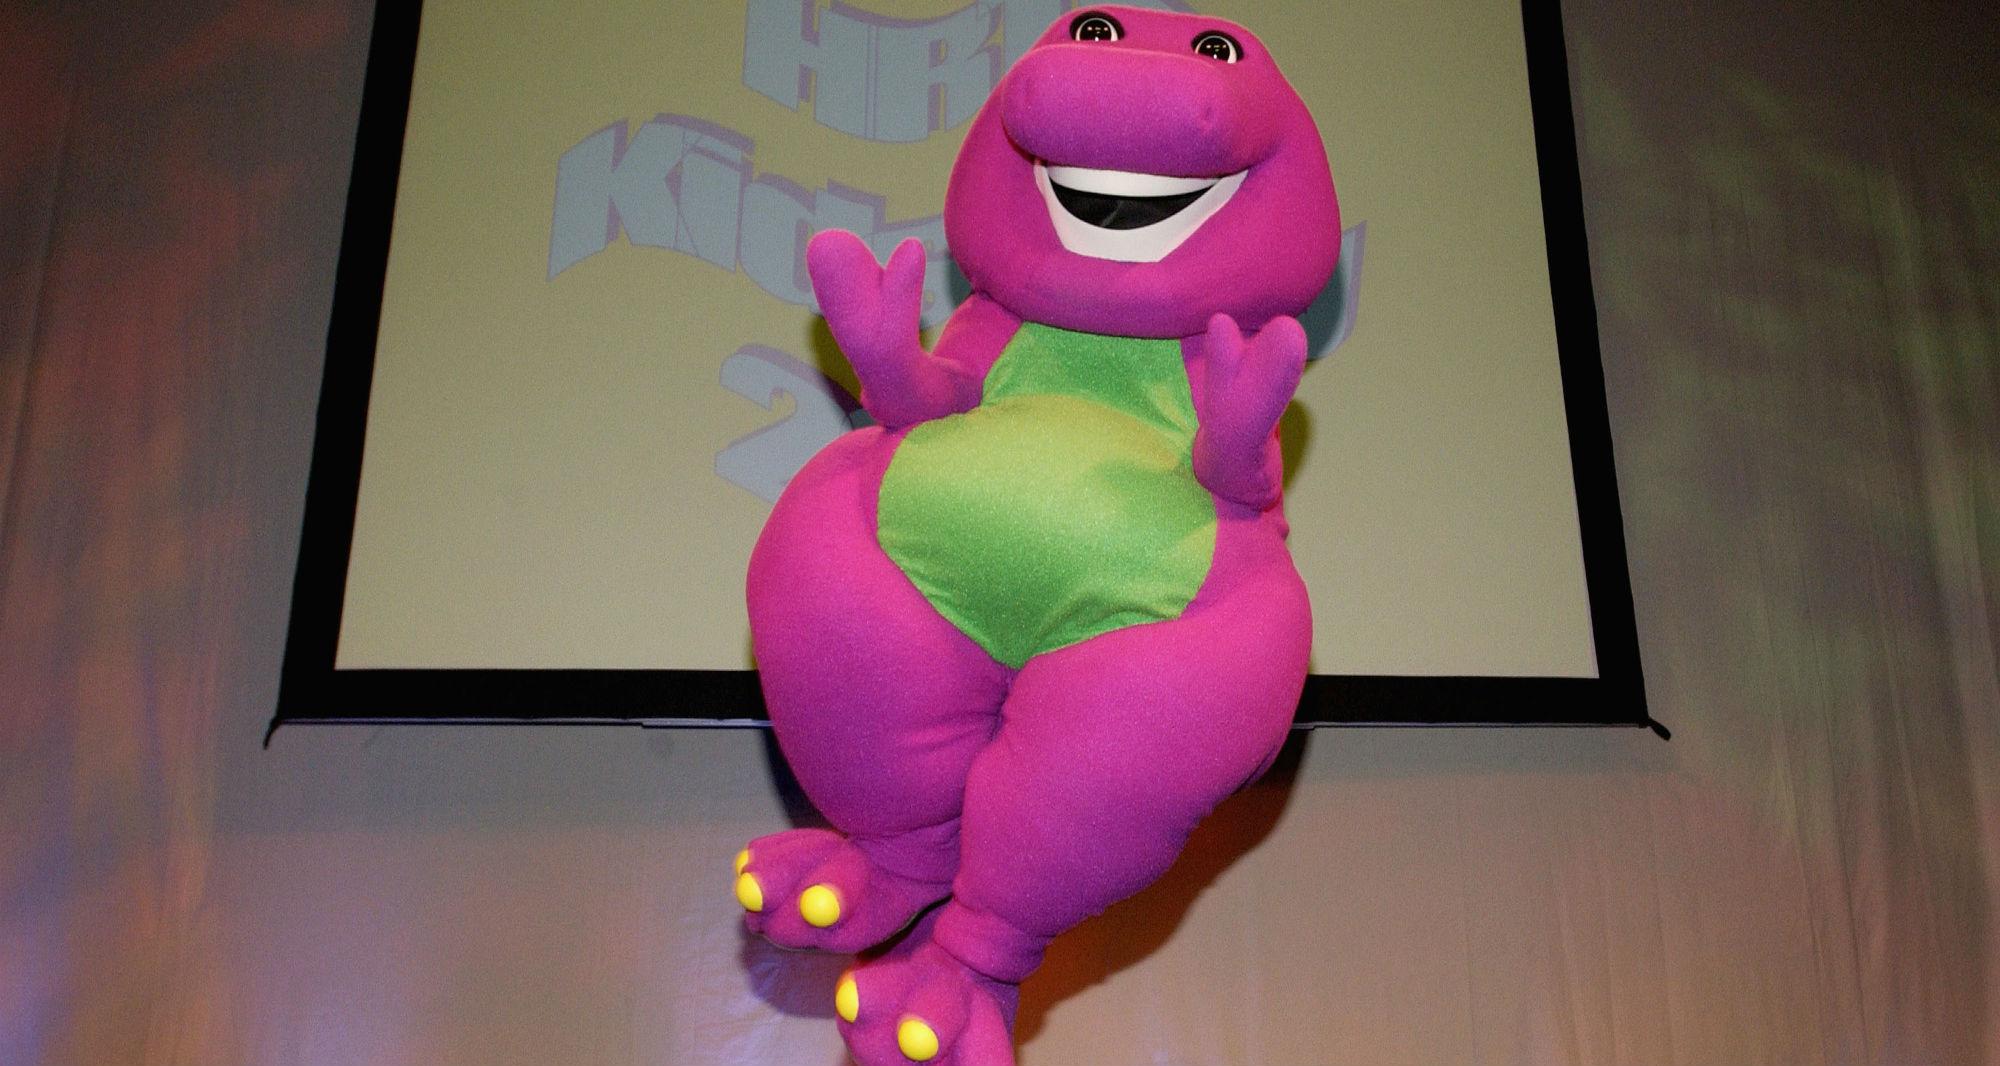 The man who played Barney for 10 years reveals the worst thing about it